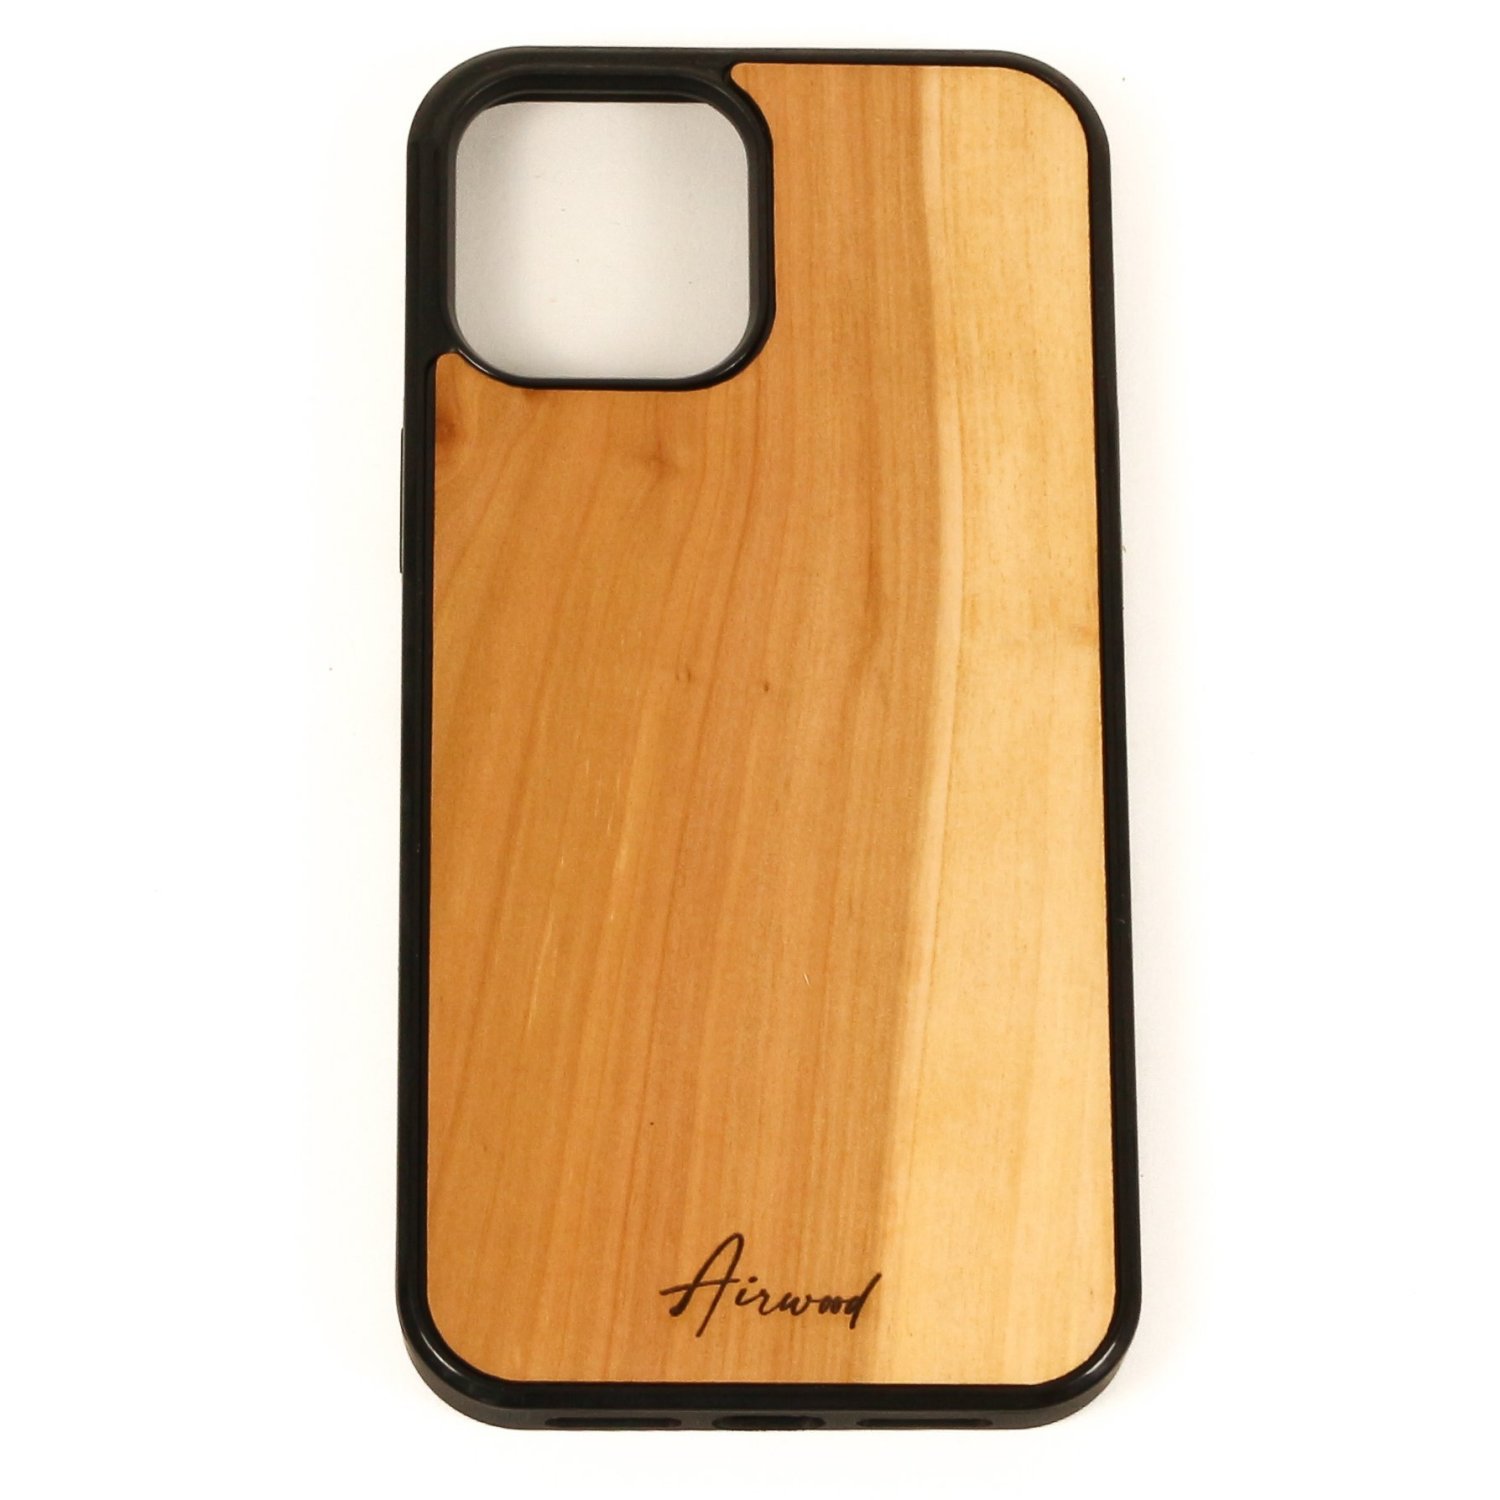 Protective cover made of apple wood for Iphone 12 Pro Max